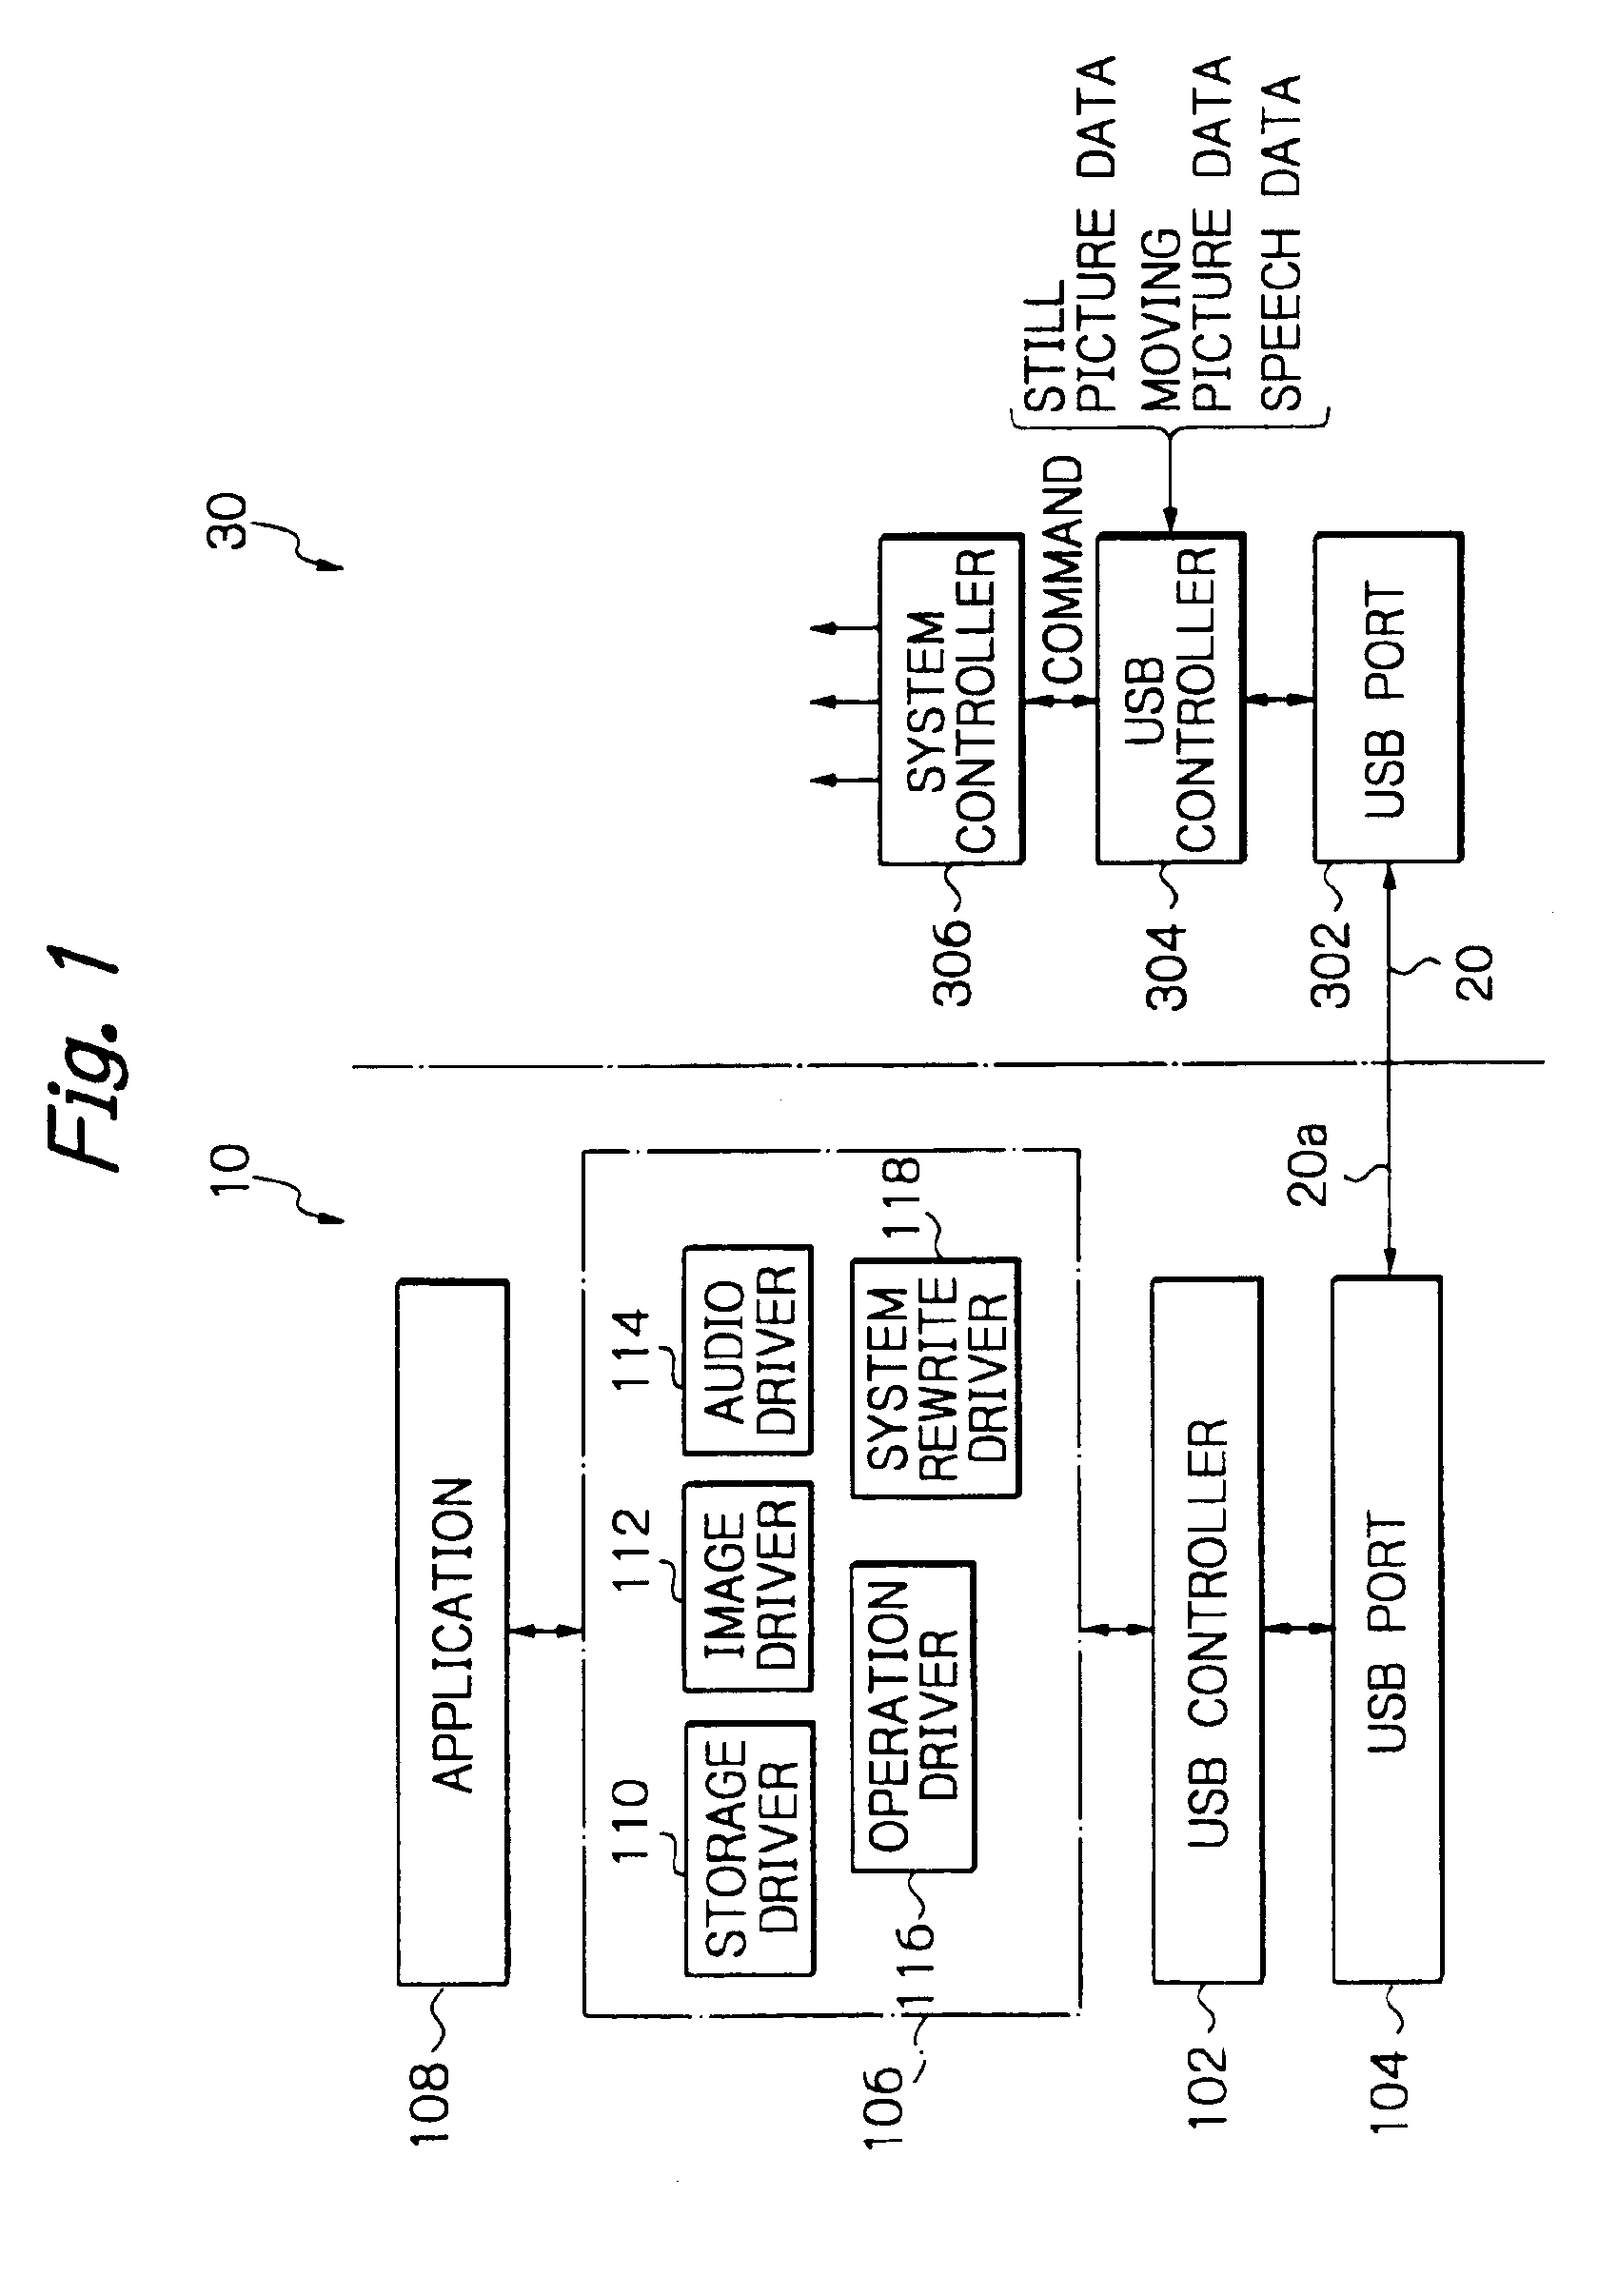 Computer system using a digital camera that is capable of inputting moving picture or still picture data